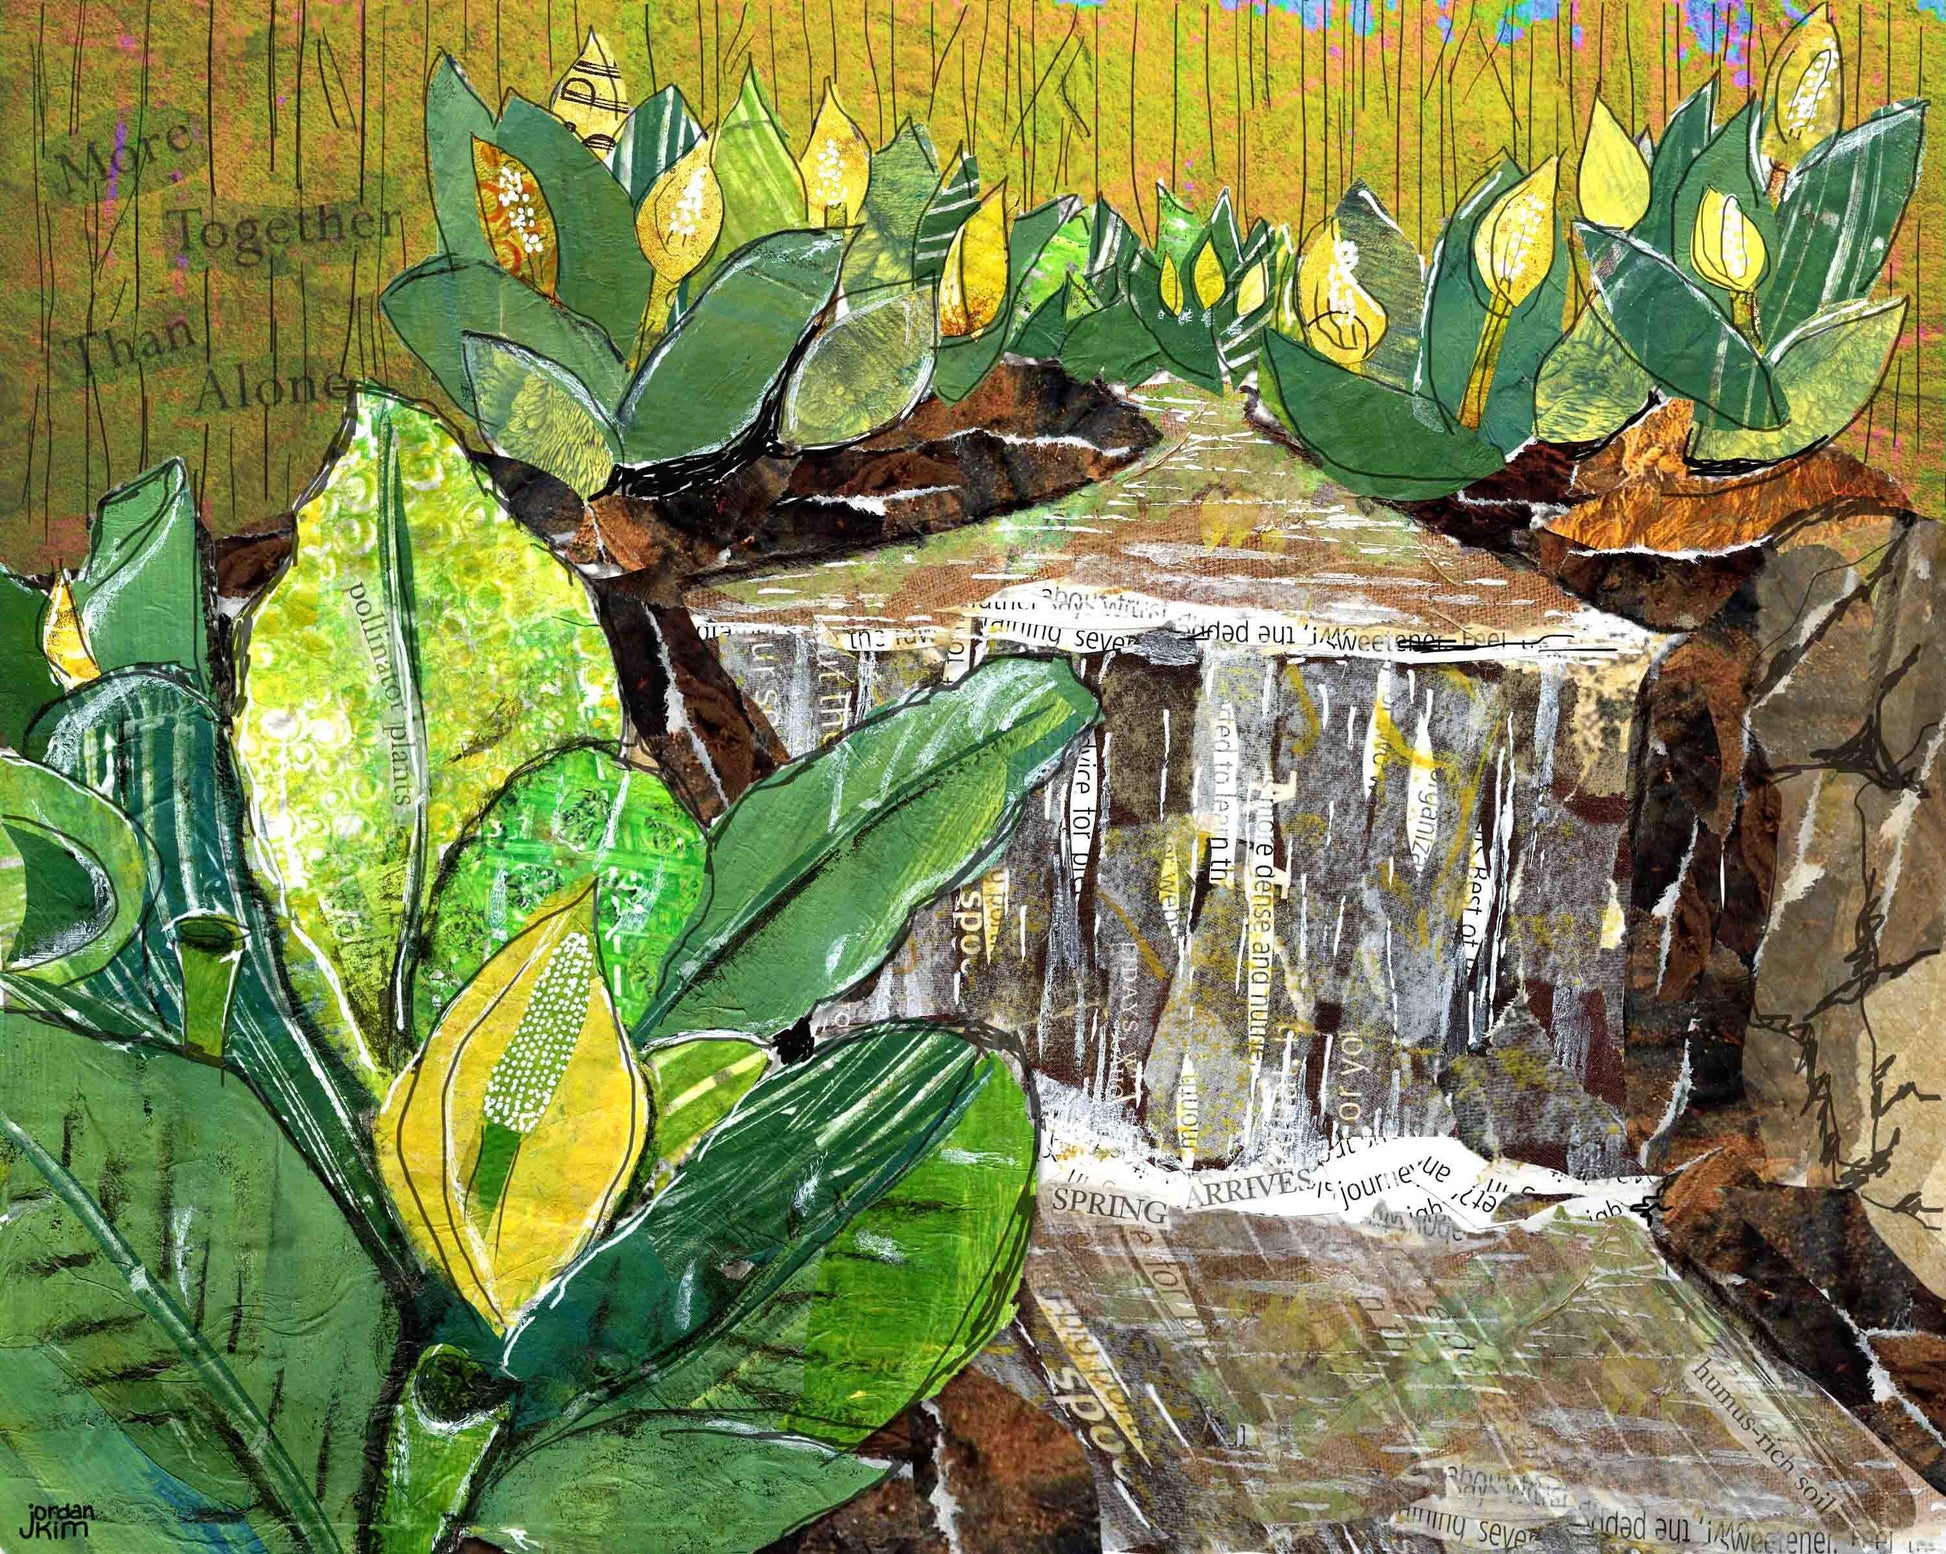 Greeting Card of Skunk Cabbage Plants Along a Waterway - Inspirational - Blank Inside